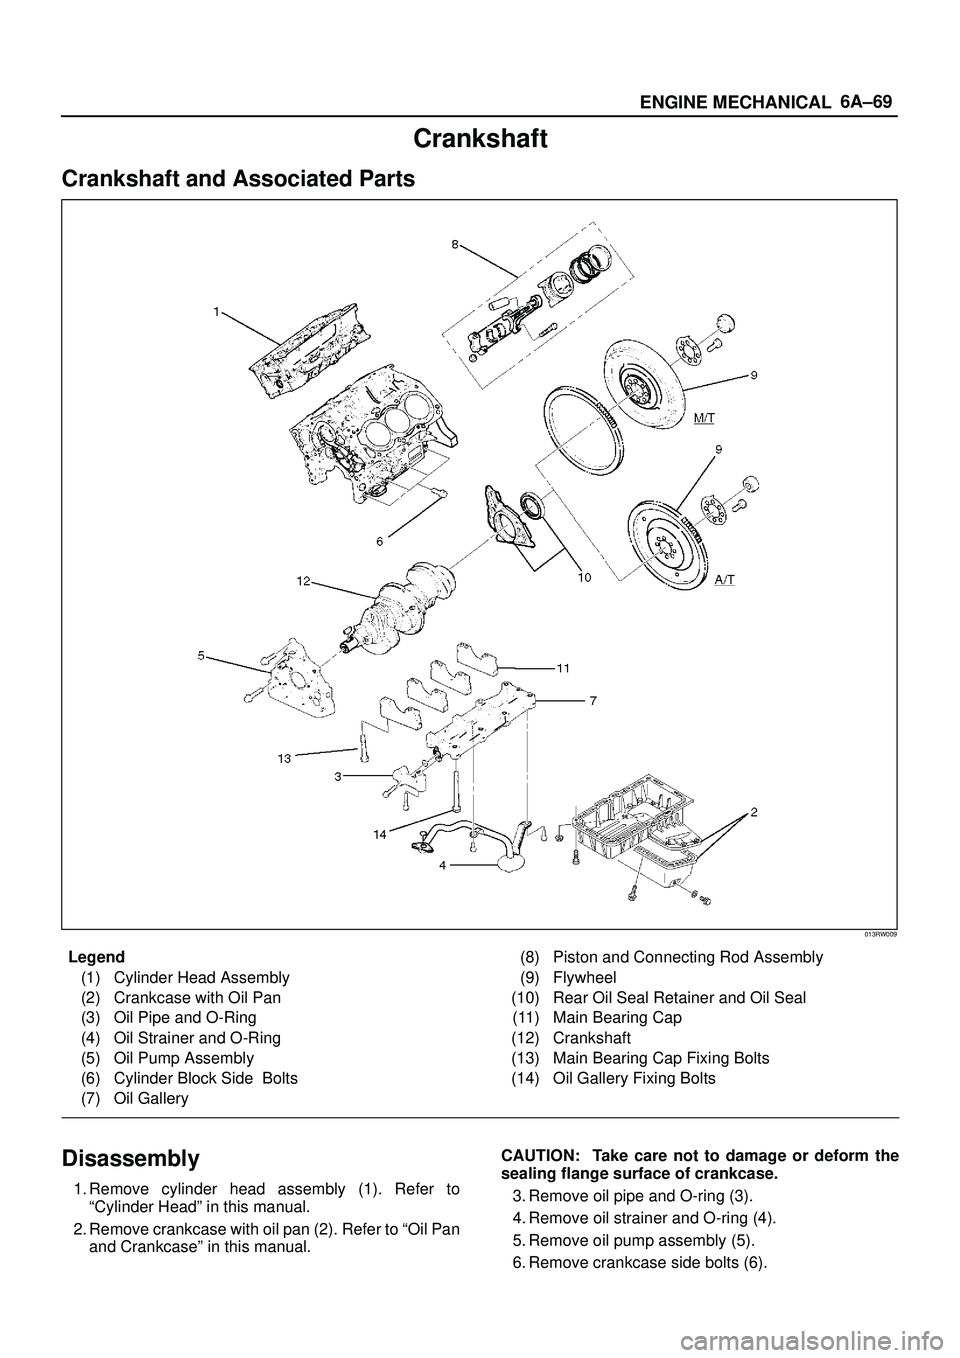 ISUZU TROOPER 1998  Service Owners Guide 6A±69
ENGINE MECHANICAL
Crankshaft
Crankshaft and Associated Parts
013RW009
Legend
(1) Cylinder Head Assembly
(2) Crankcase with Oil Pan
(3) Oil Pipe and O-Ring
(4) Oil Strainer and O-Ring
(5) Oil Pu